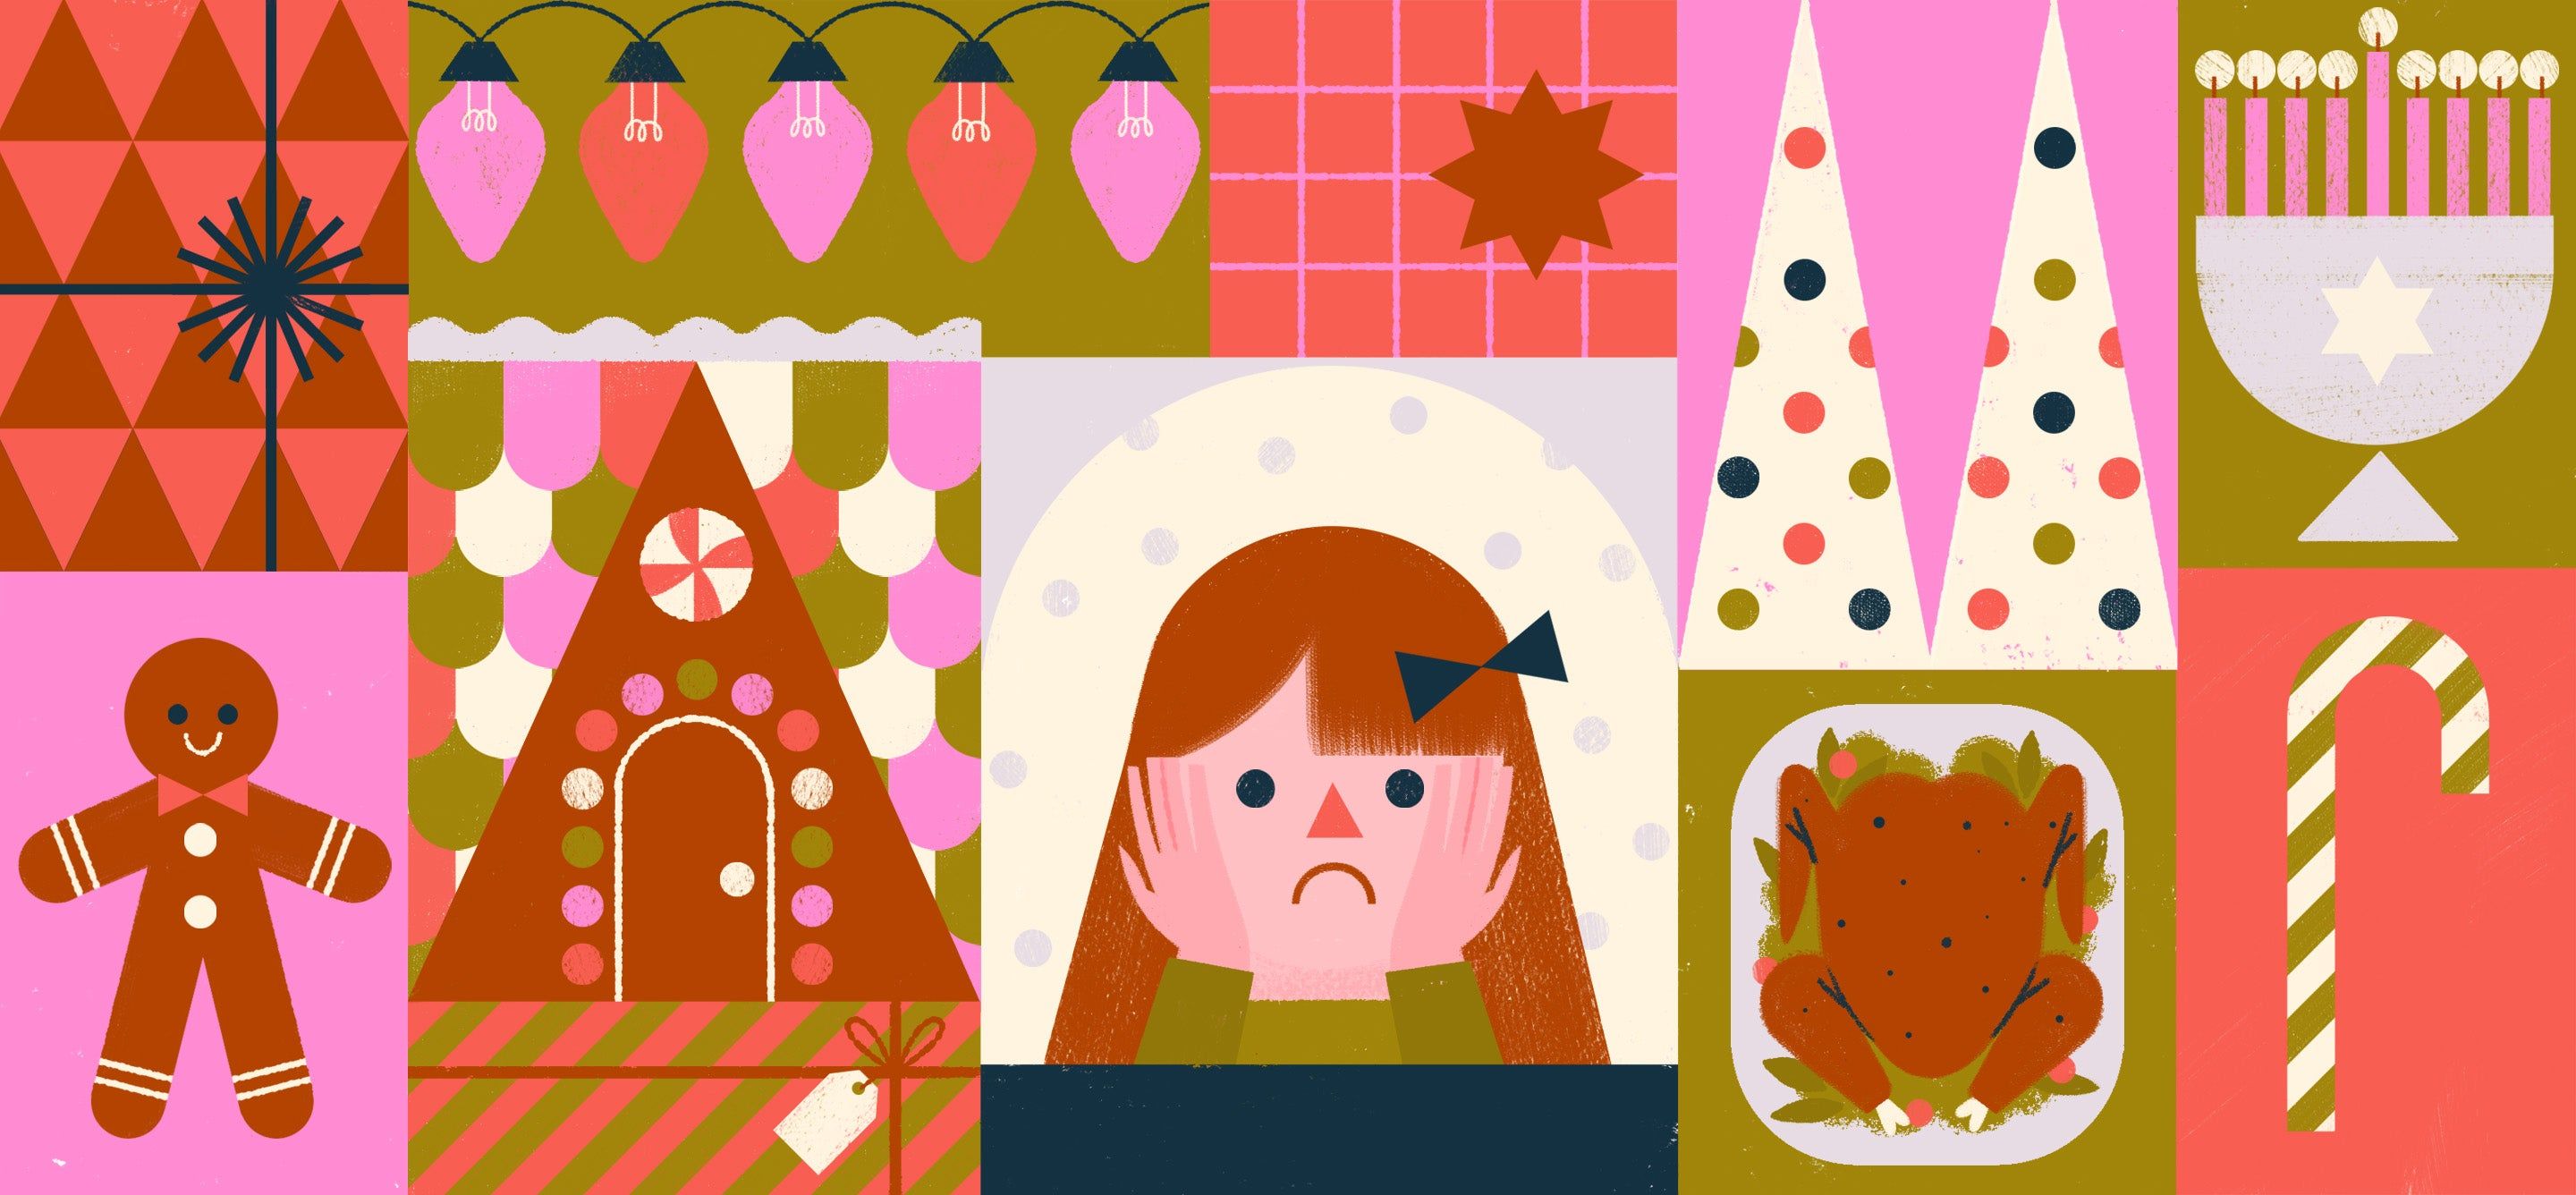 illustrations of a child overwhelmed by things that can induce a holiday meltdown like trees, gingerbread, turkey, candy